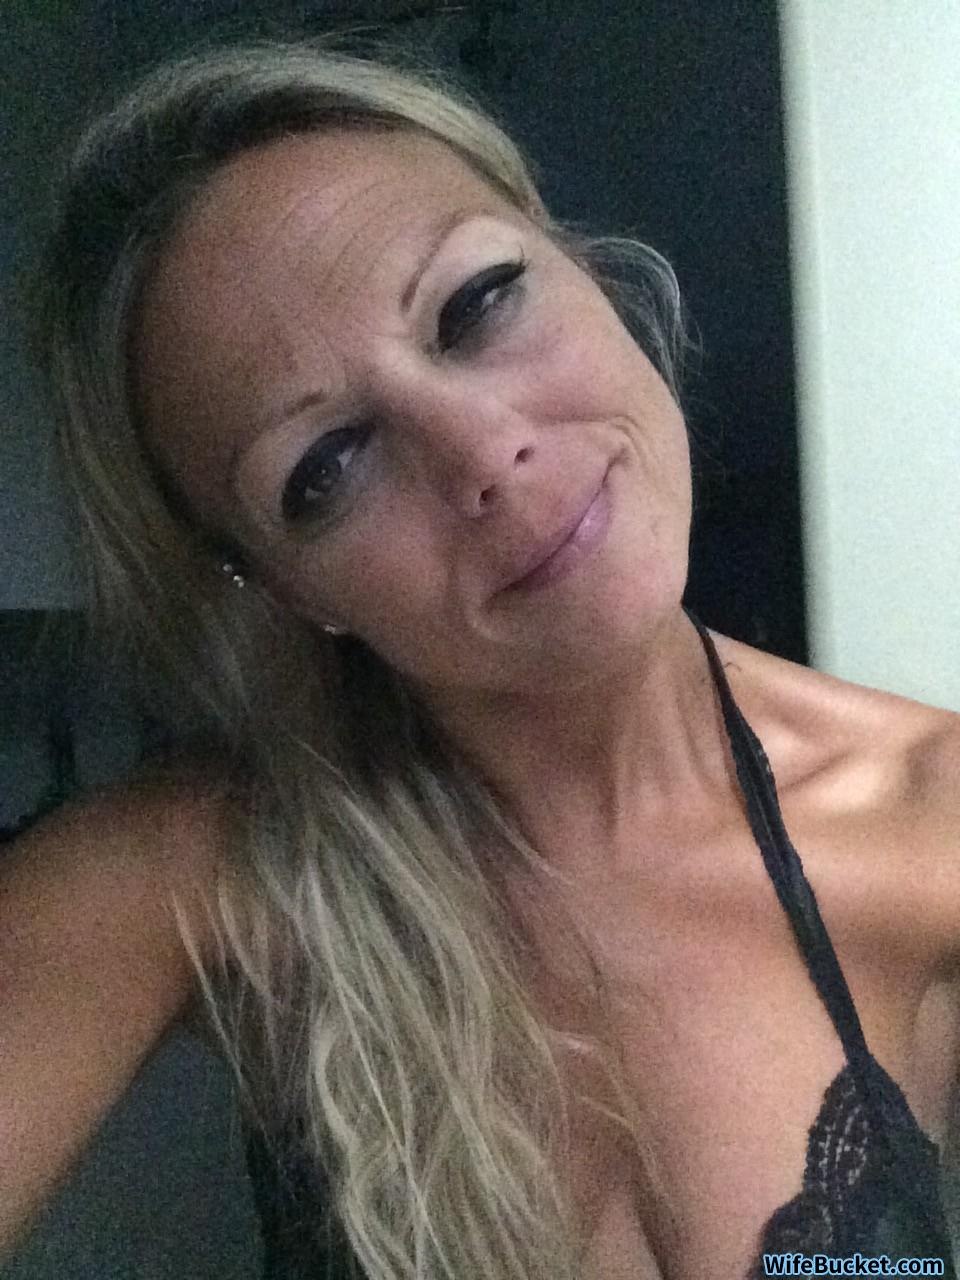 Wifebucket Milf Slut Submitted Nude Selfies And Also Blowjobs